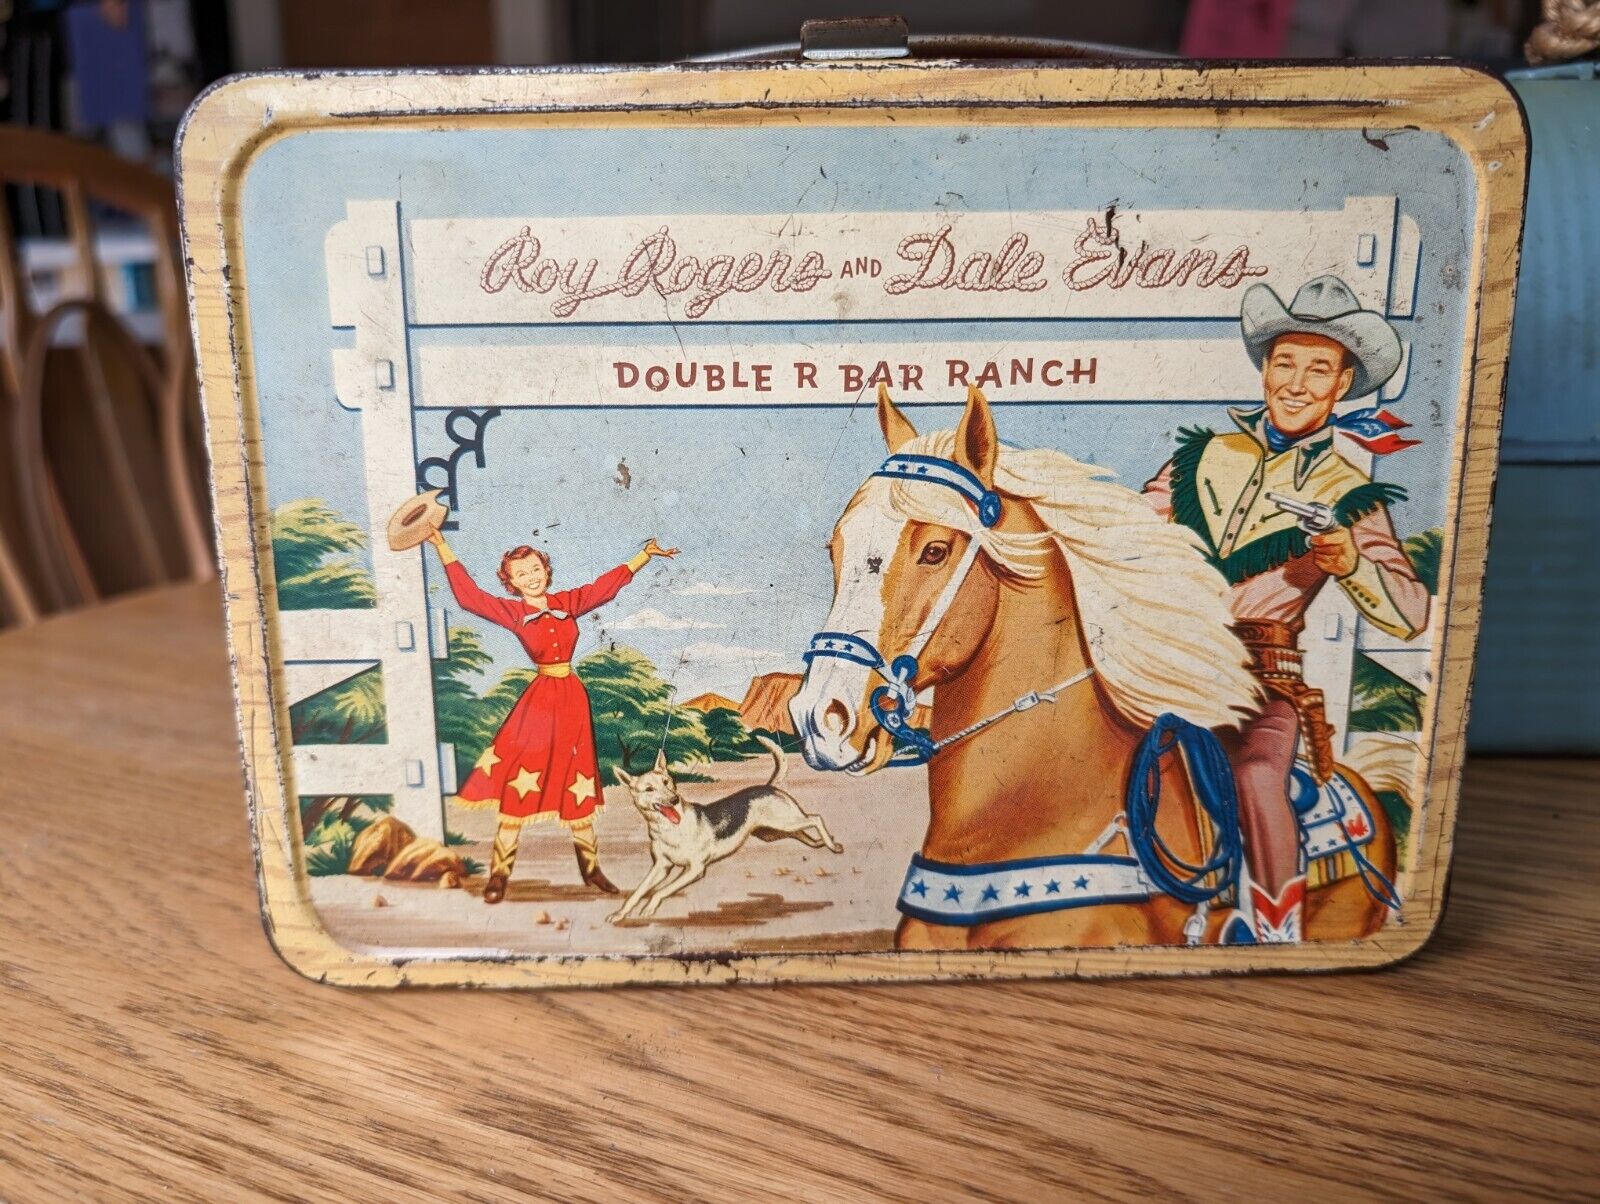 Roy Rogers and Dale Evans Double R Bar Ranch Metal Lunchbox NO THERMOS Vintage